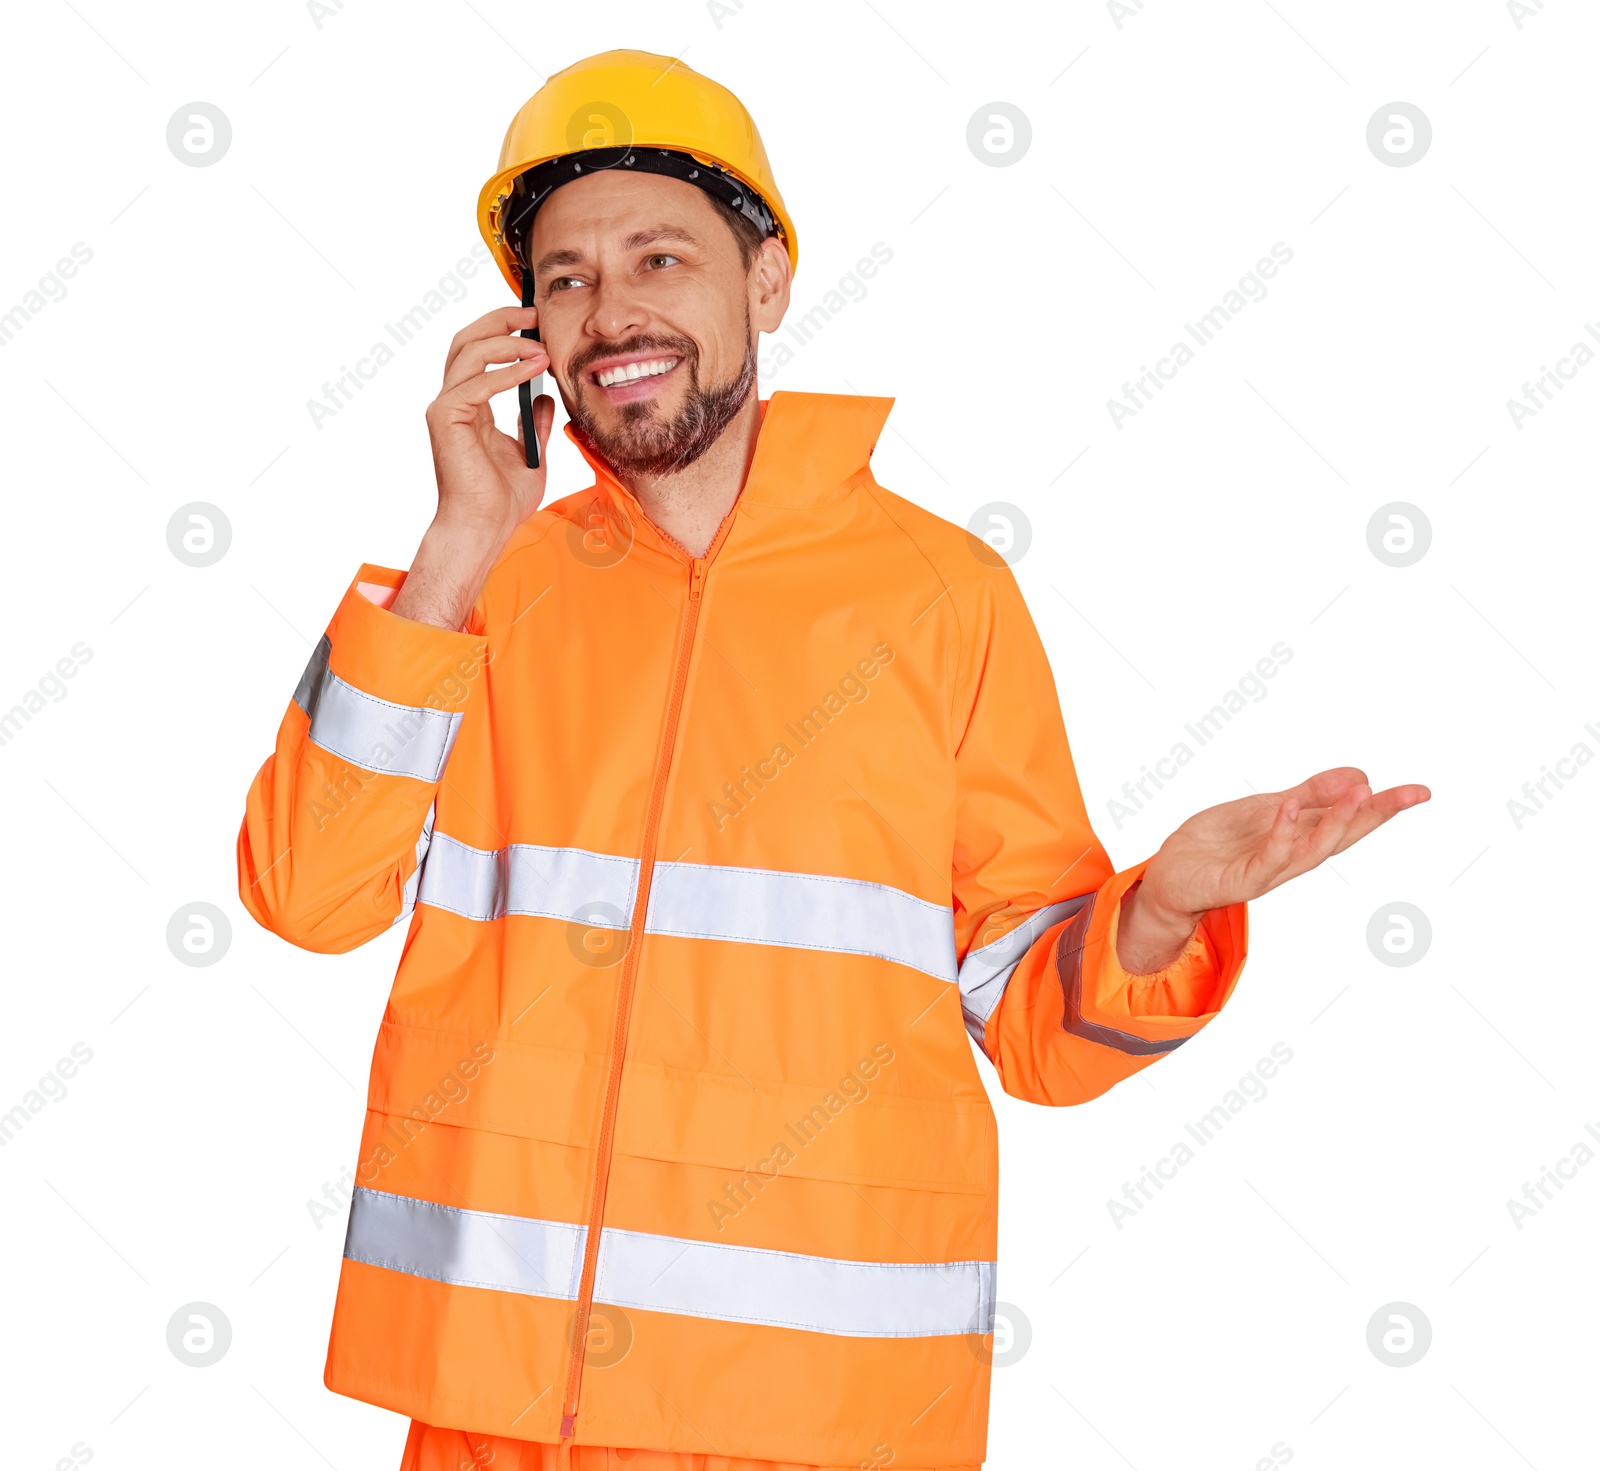 Photo of Man in reflective uniform talking on phone against white background